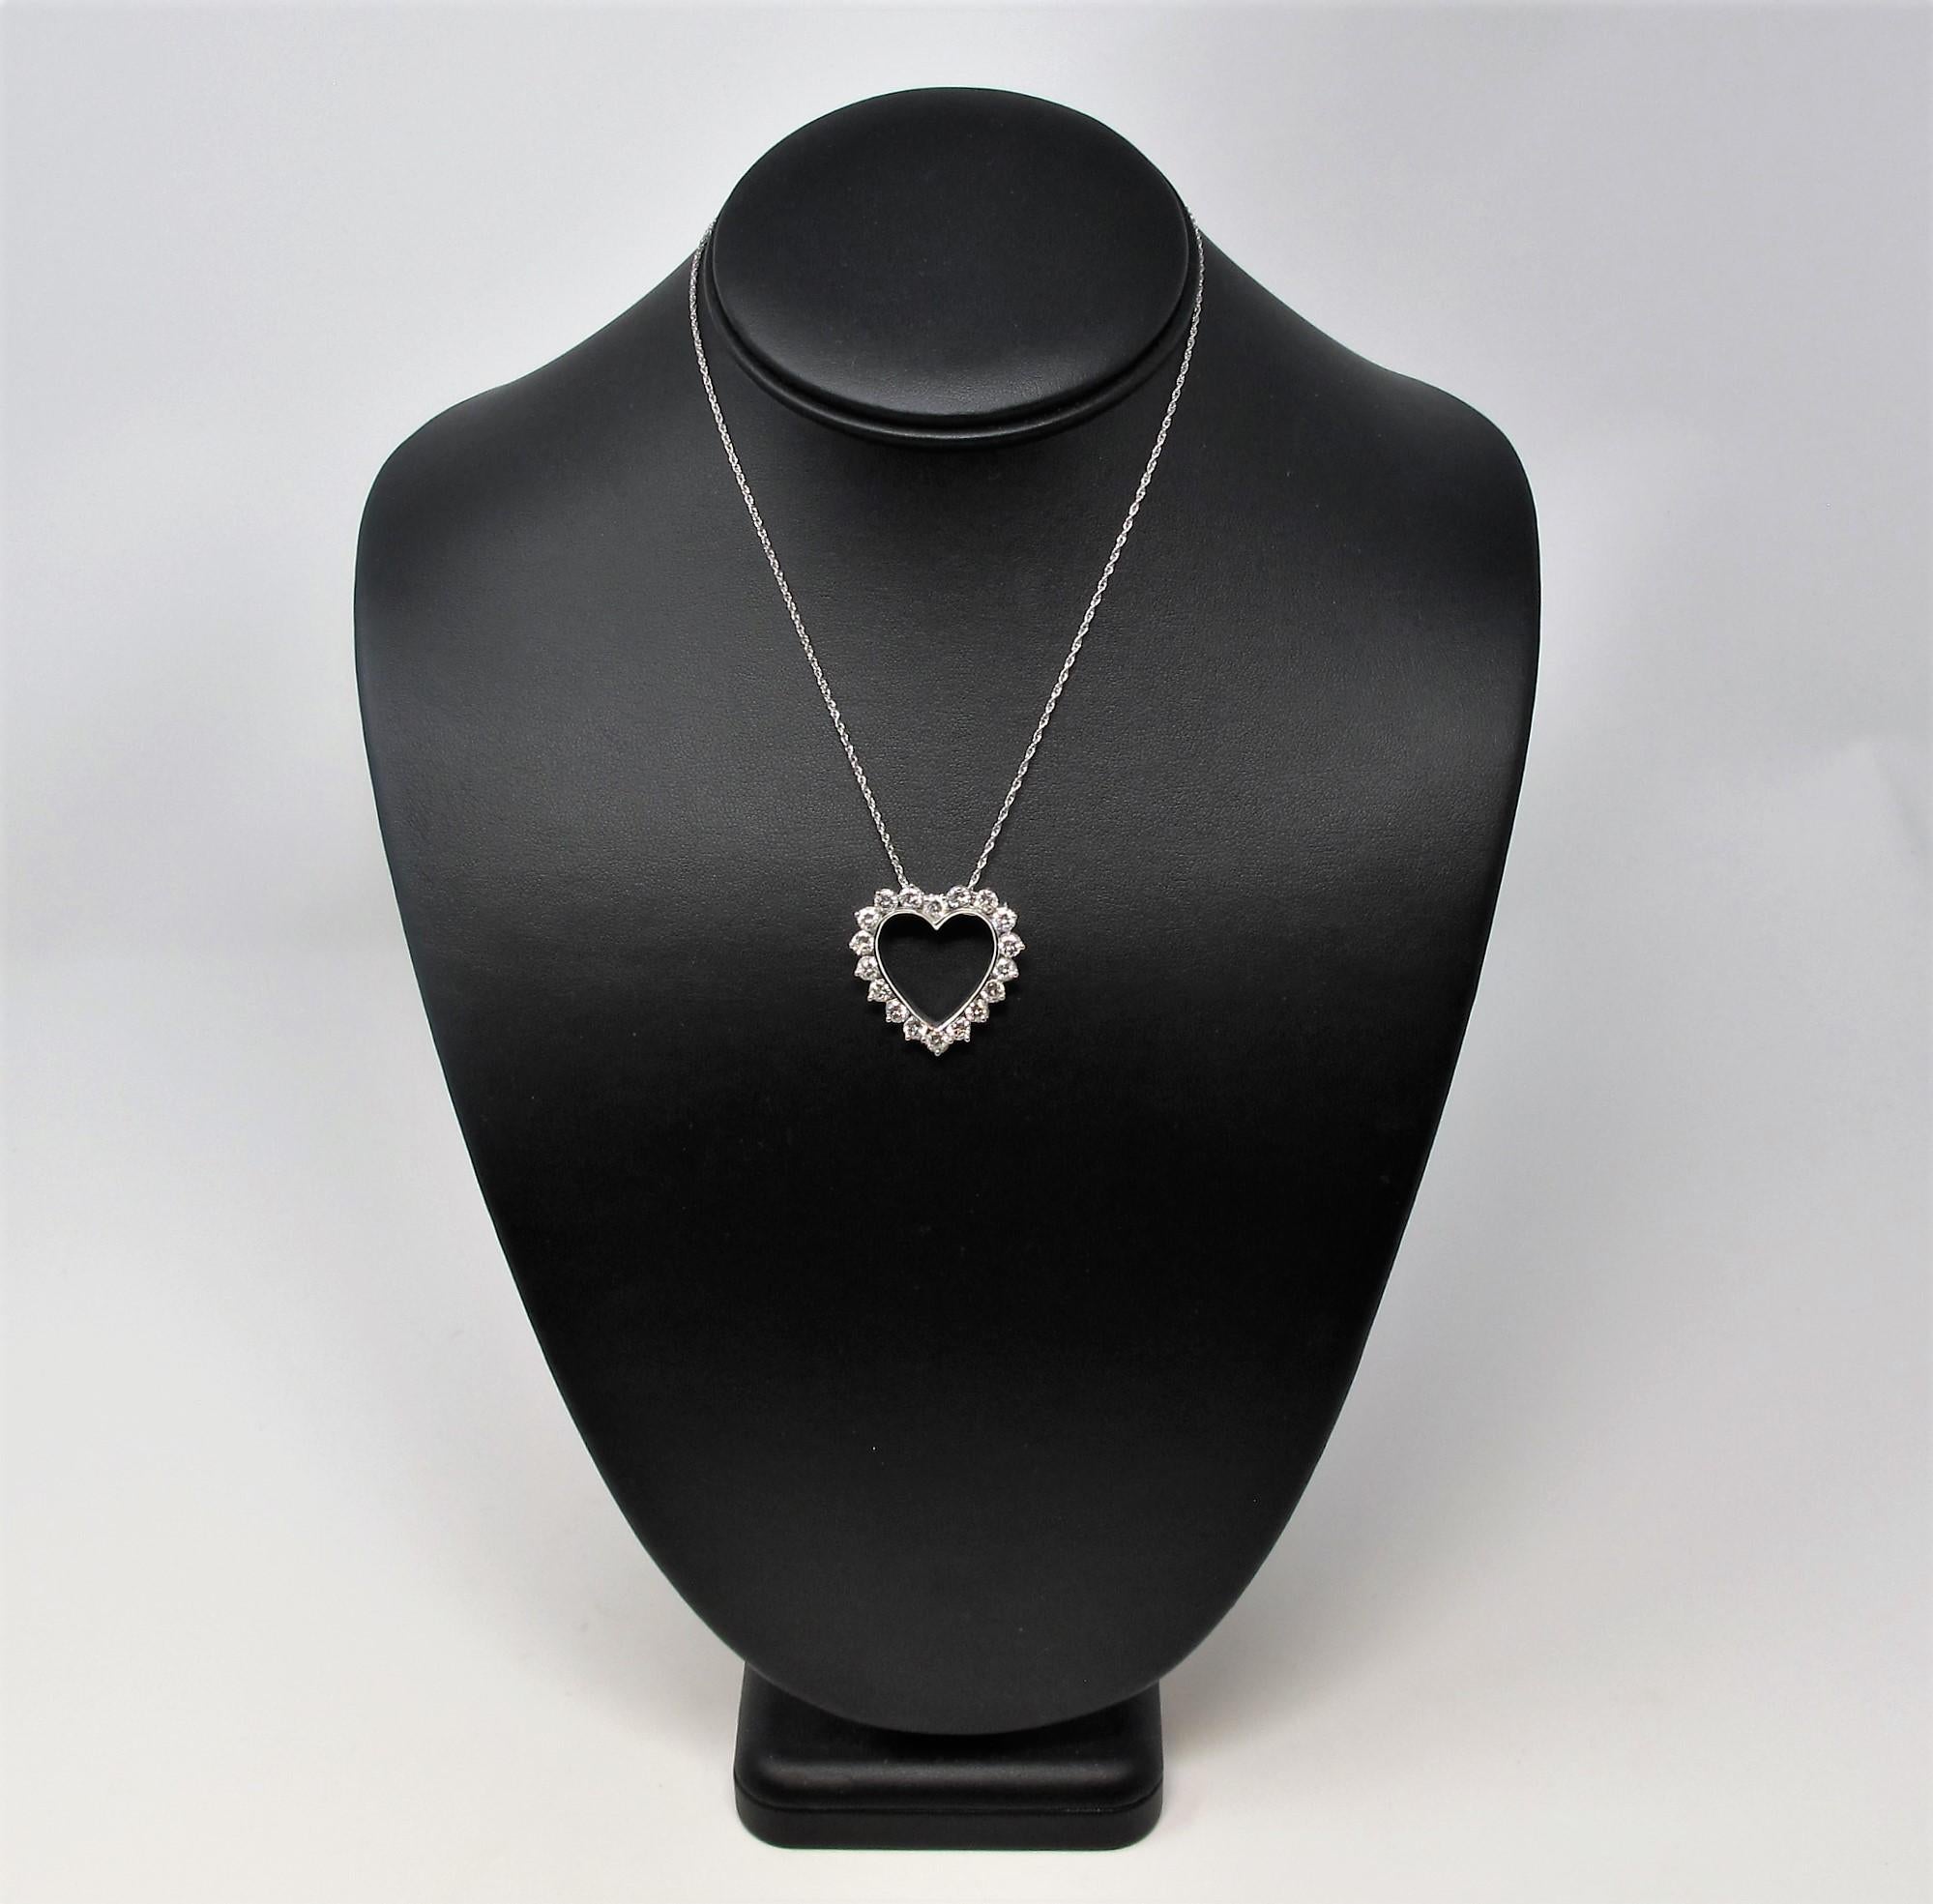 You will fall head over heels in love with this breathtaking open heart pendant necklace. The sizable round diamonds are a bright, icy white and sparkle beautifully from all angles.  This timeless piece can also be worn as a brooch, making it the